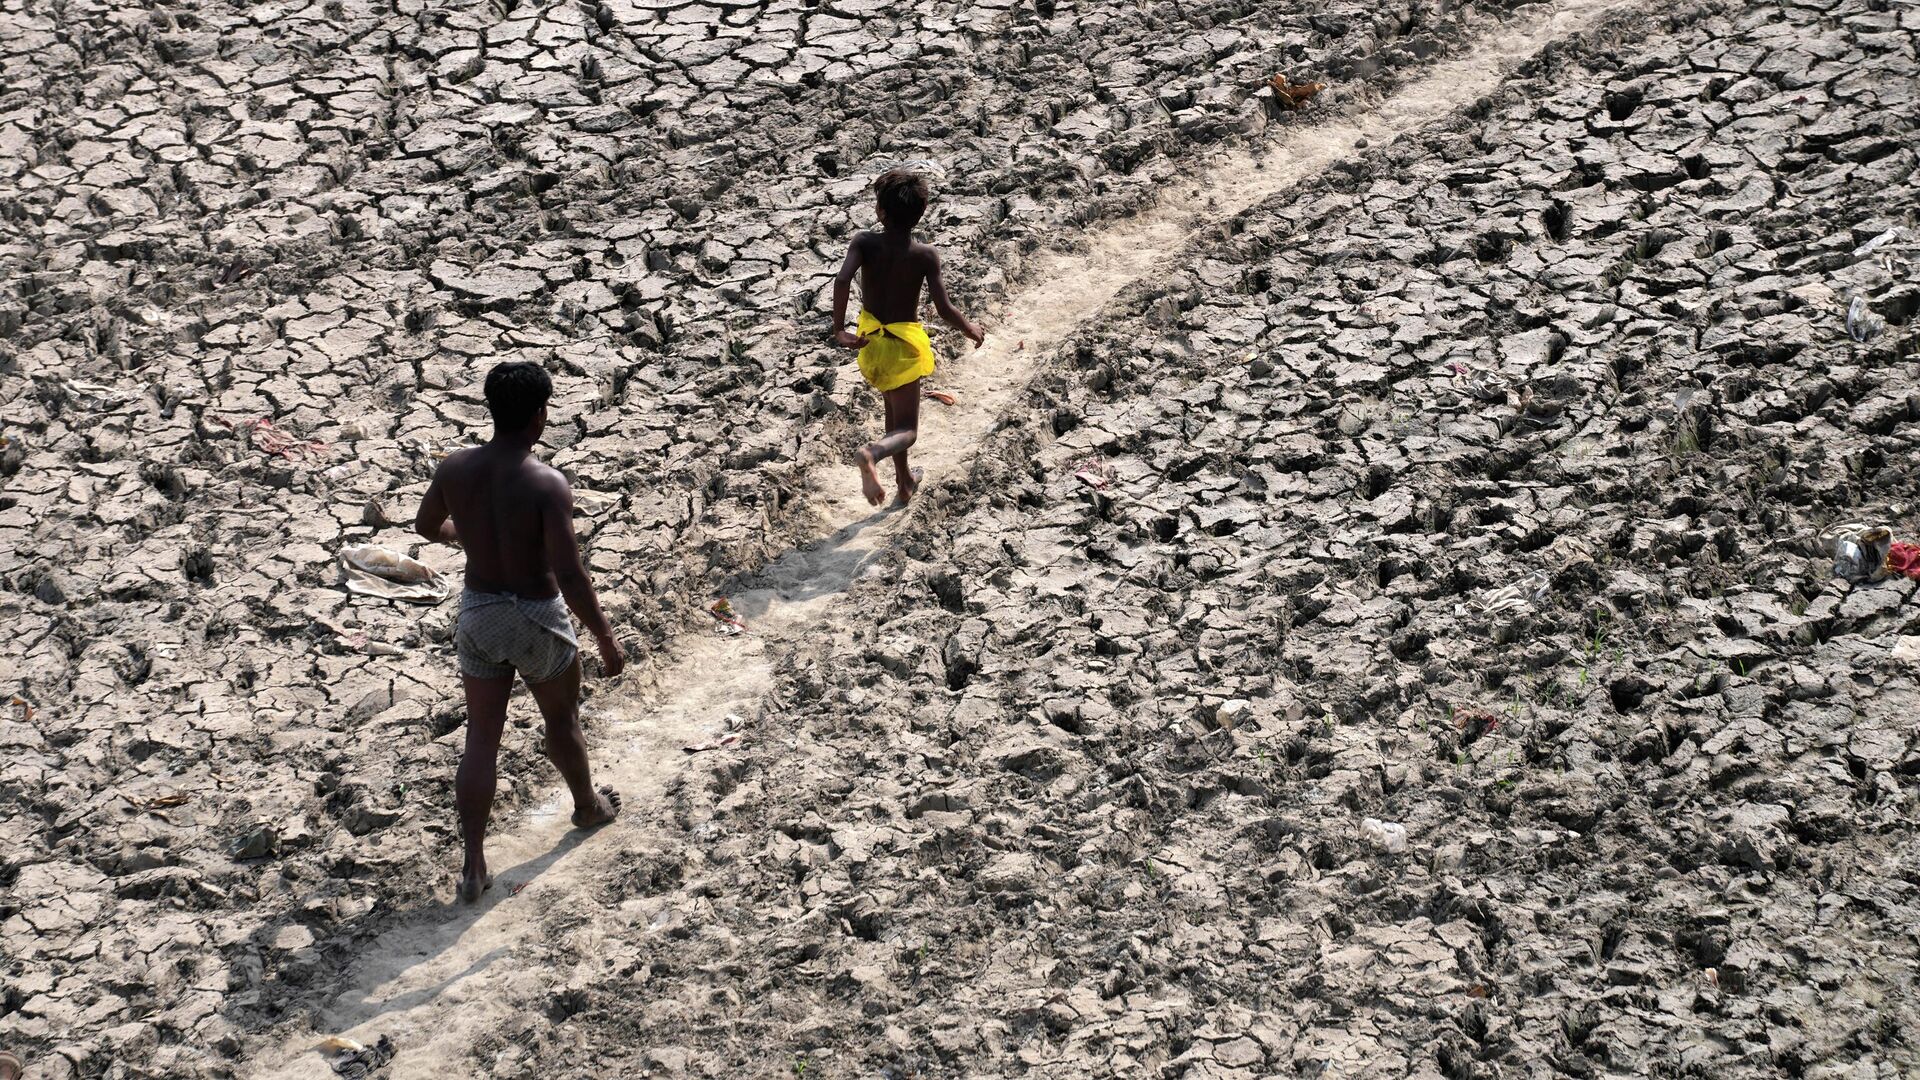 A man and a boy walk across an almost dried up bed of river Yamuna following hot weather in New Delhi, India, Monday, May 2, 2022 - Sputnik International, 1920, 17.05.2022